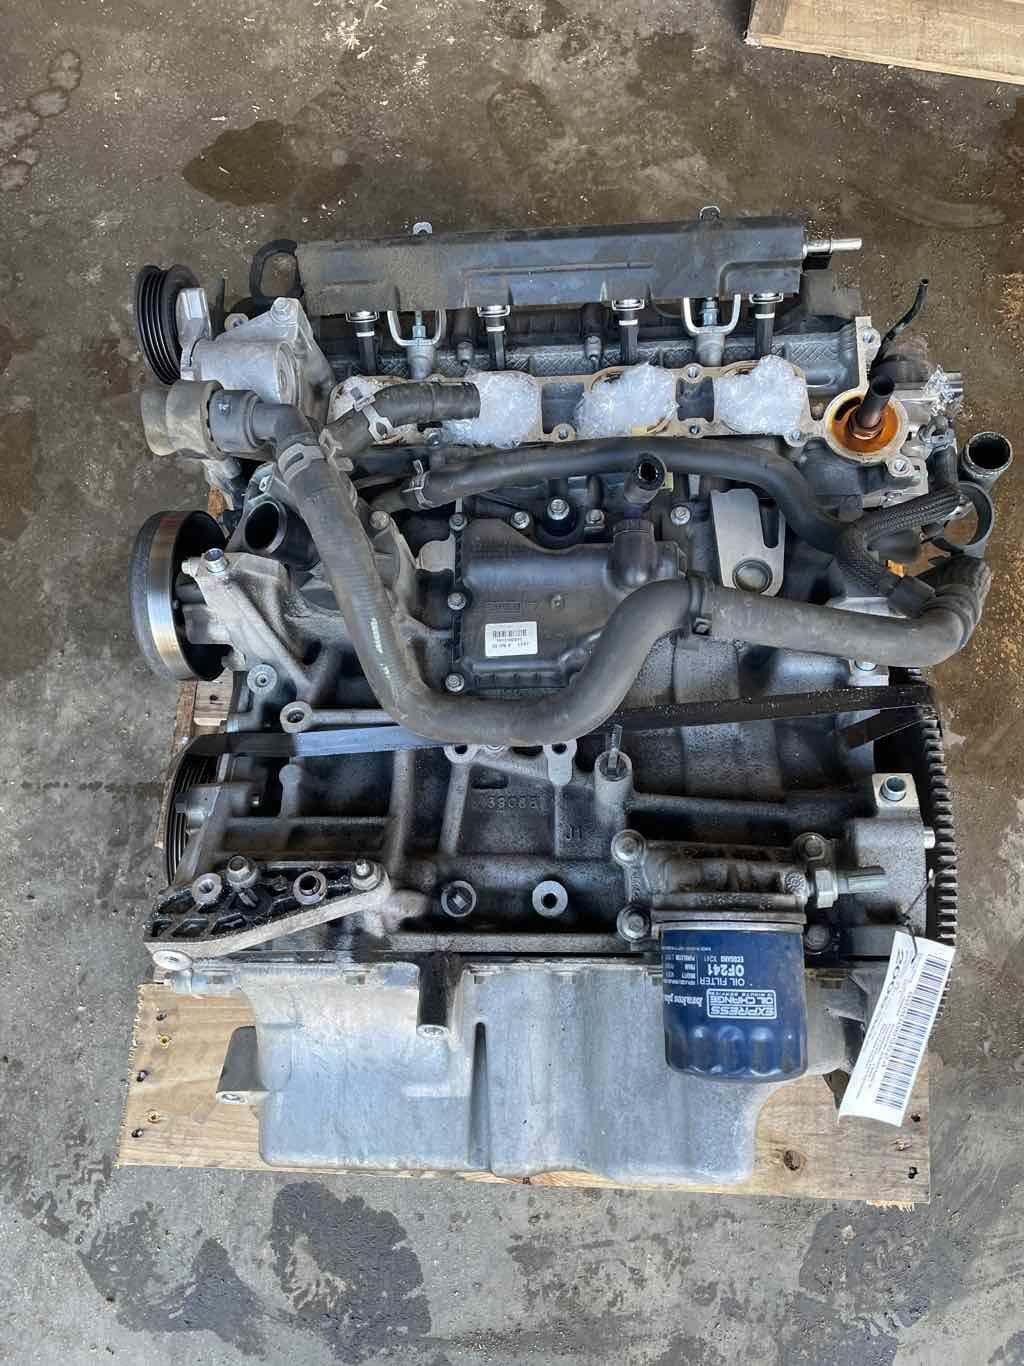 Assy Vin 7 8th Digit 136k Runs Great p Fits FORD FUSION 2013-2016